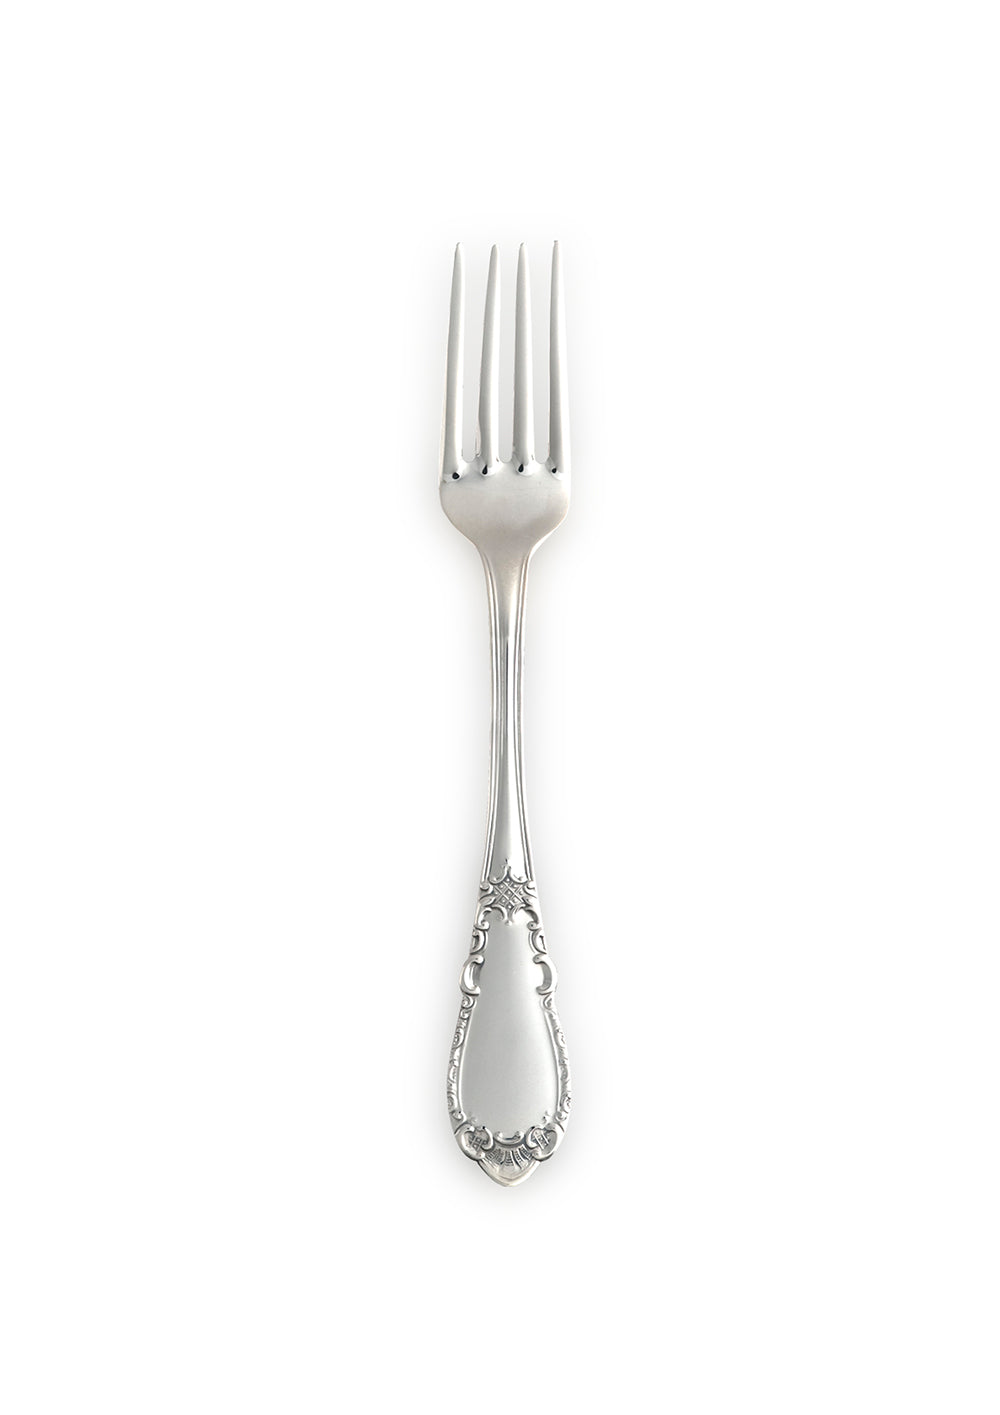 Noble small dining fork